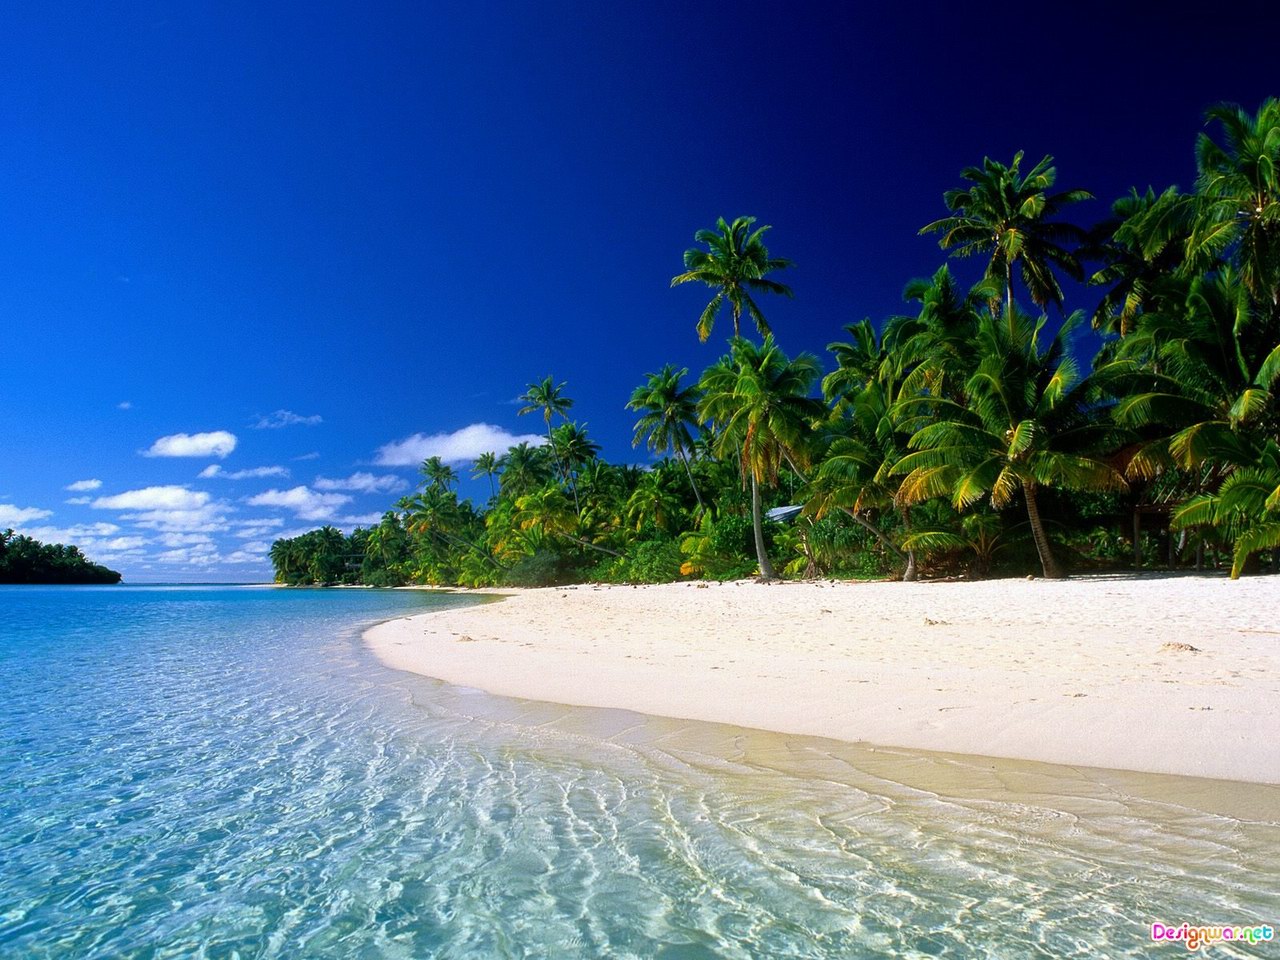 Beach HD Wallpaper And Make This For Your Desktop Tablet